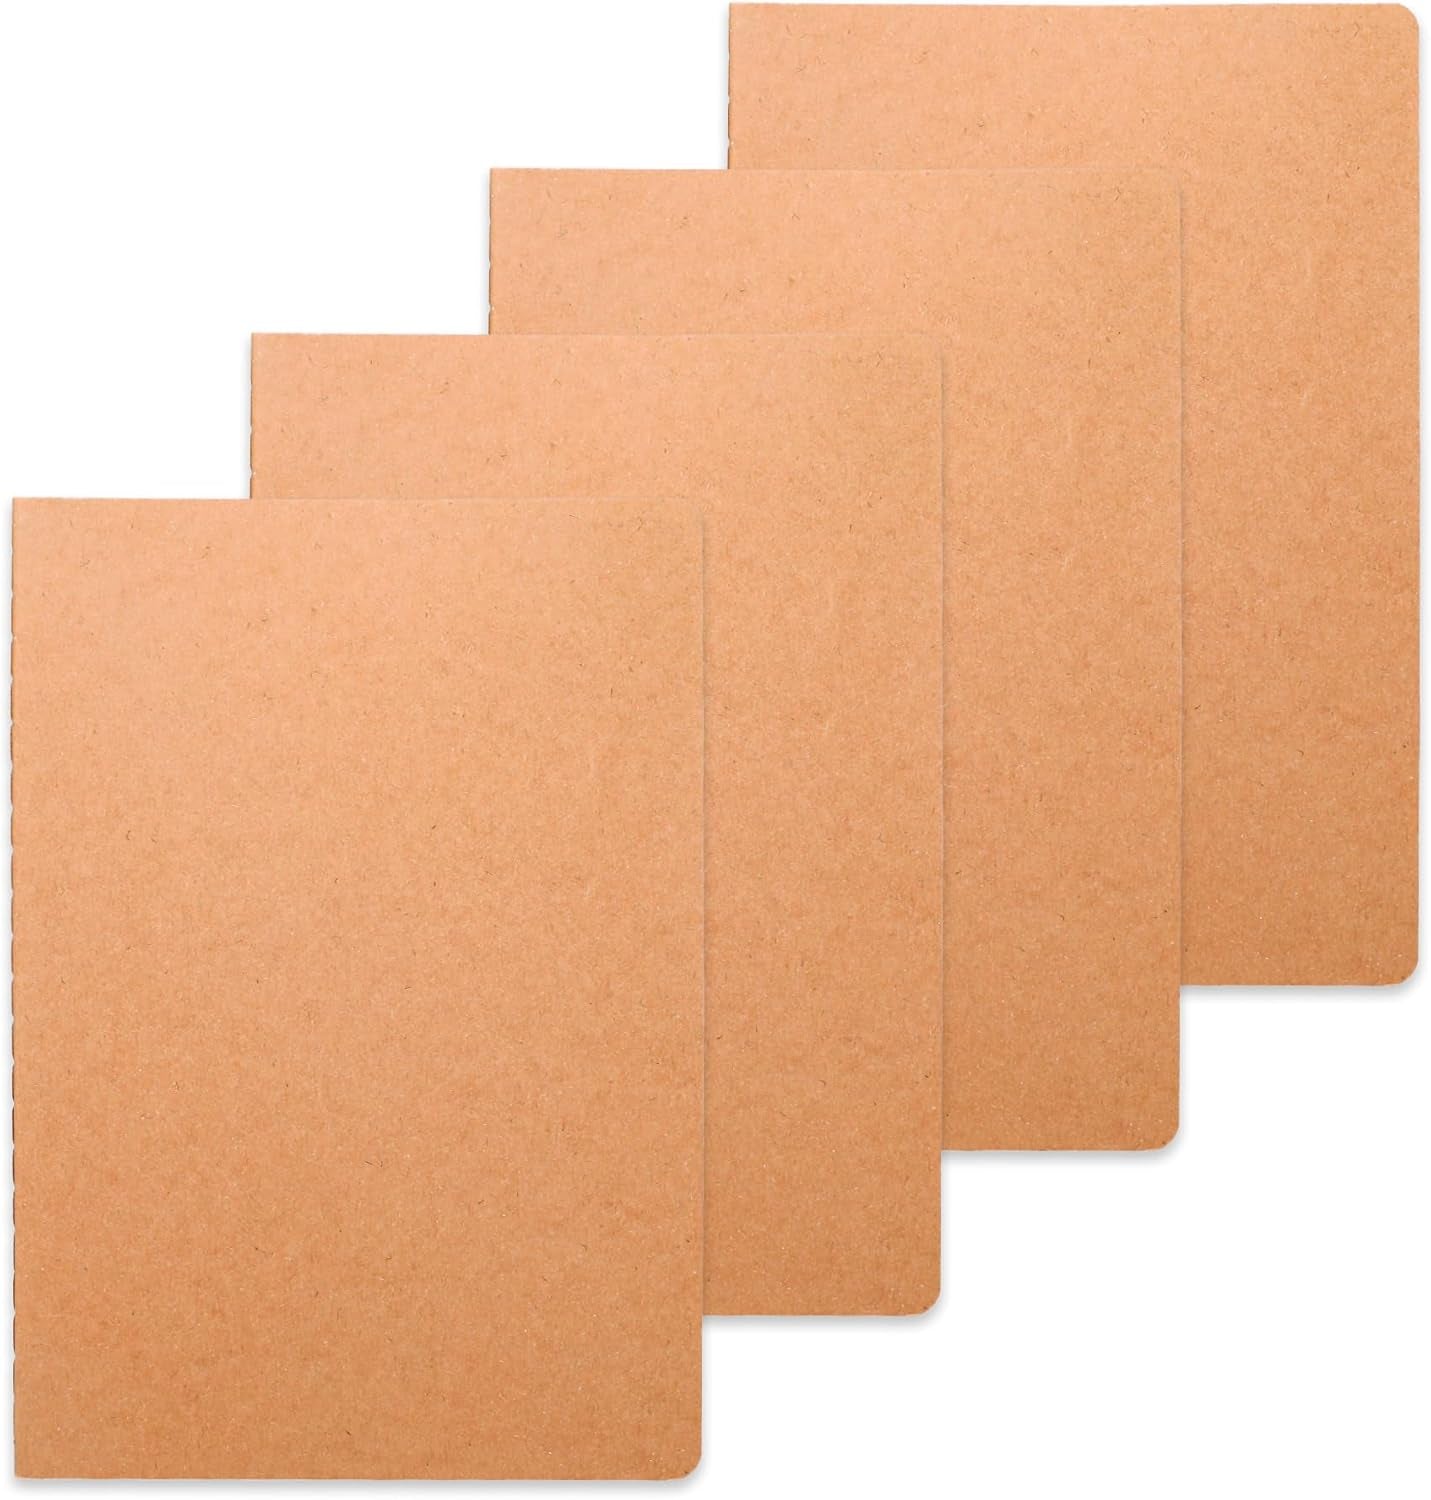 24 Pieces Blank Kraft Notebooks, 8.3X5.5 Inches A5 Small Journals Bulk Blank Notebooks 80 GSM Unlined with 60 Pages for Kids Students School Office Traveler Sketching/Drawing/Writing Supplies,30 Sheets